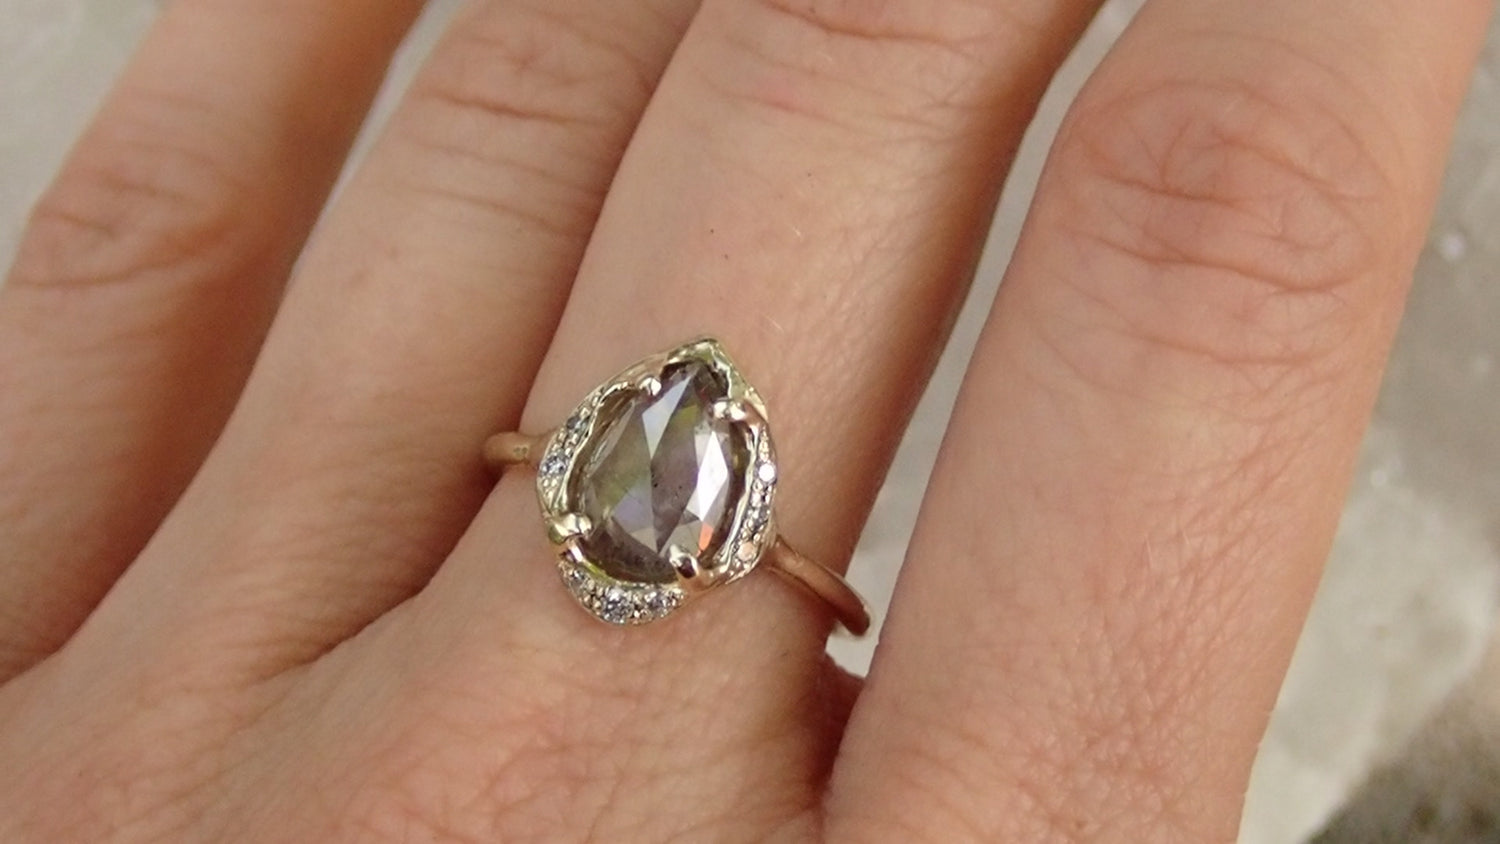 1.72ct Salt and Pepper Pear Diamond Ring in a Scattered Halo Setting